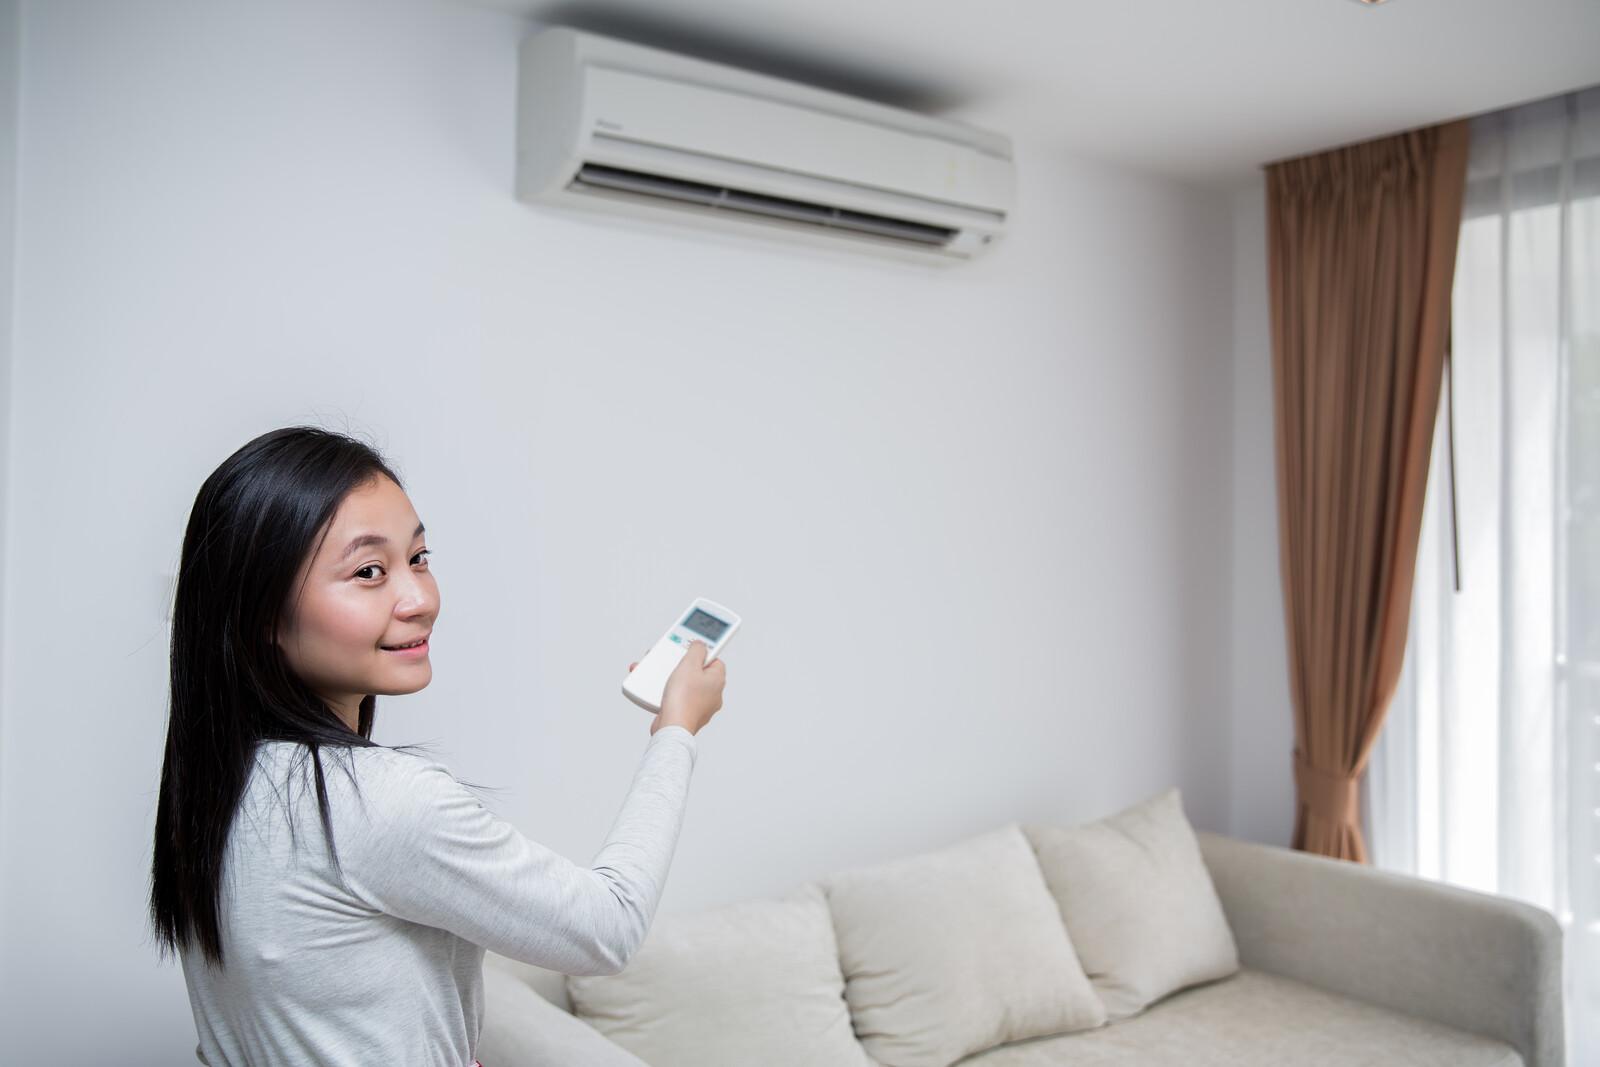 Ductless Cooling and Heating